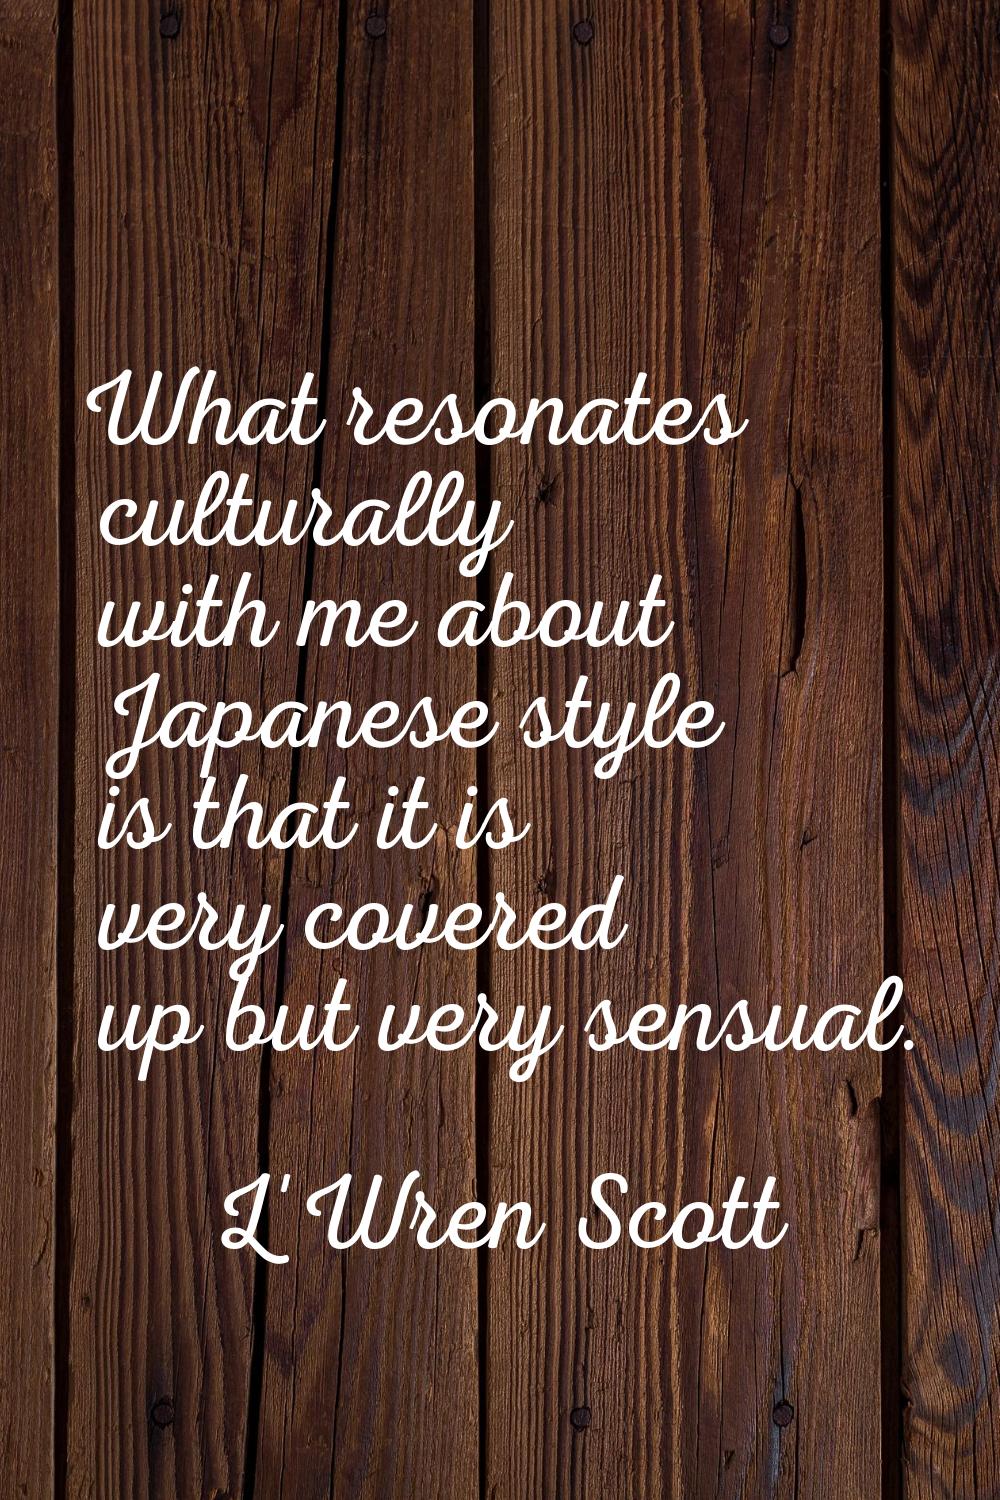 What resonates culturally with me about Japanese style is that it is very covered up but very sensu